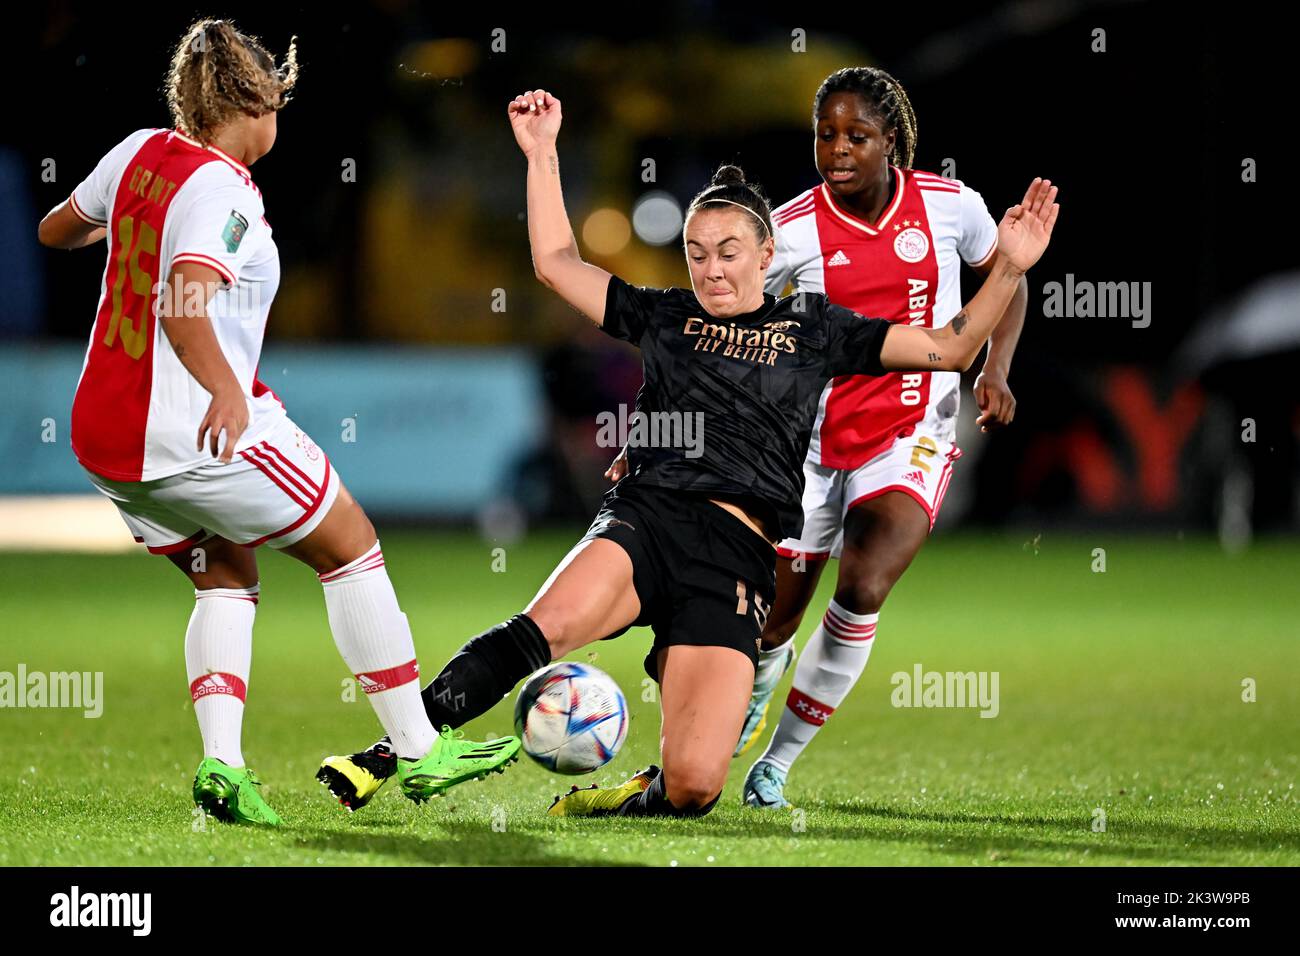 AMSTERDAM - (lr) Caitlin Foord of Arsenal WFC, Liza van der Most of Ajax women during the UEFA Champions League women's match between Ajax Amsterdam and Arsenal FC at De Toekomst sports complex on September 28, 2022 in Amsterdam, Netherlands. ANP GERRIT VAN COLOGNE Stock Photo